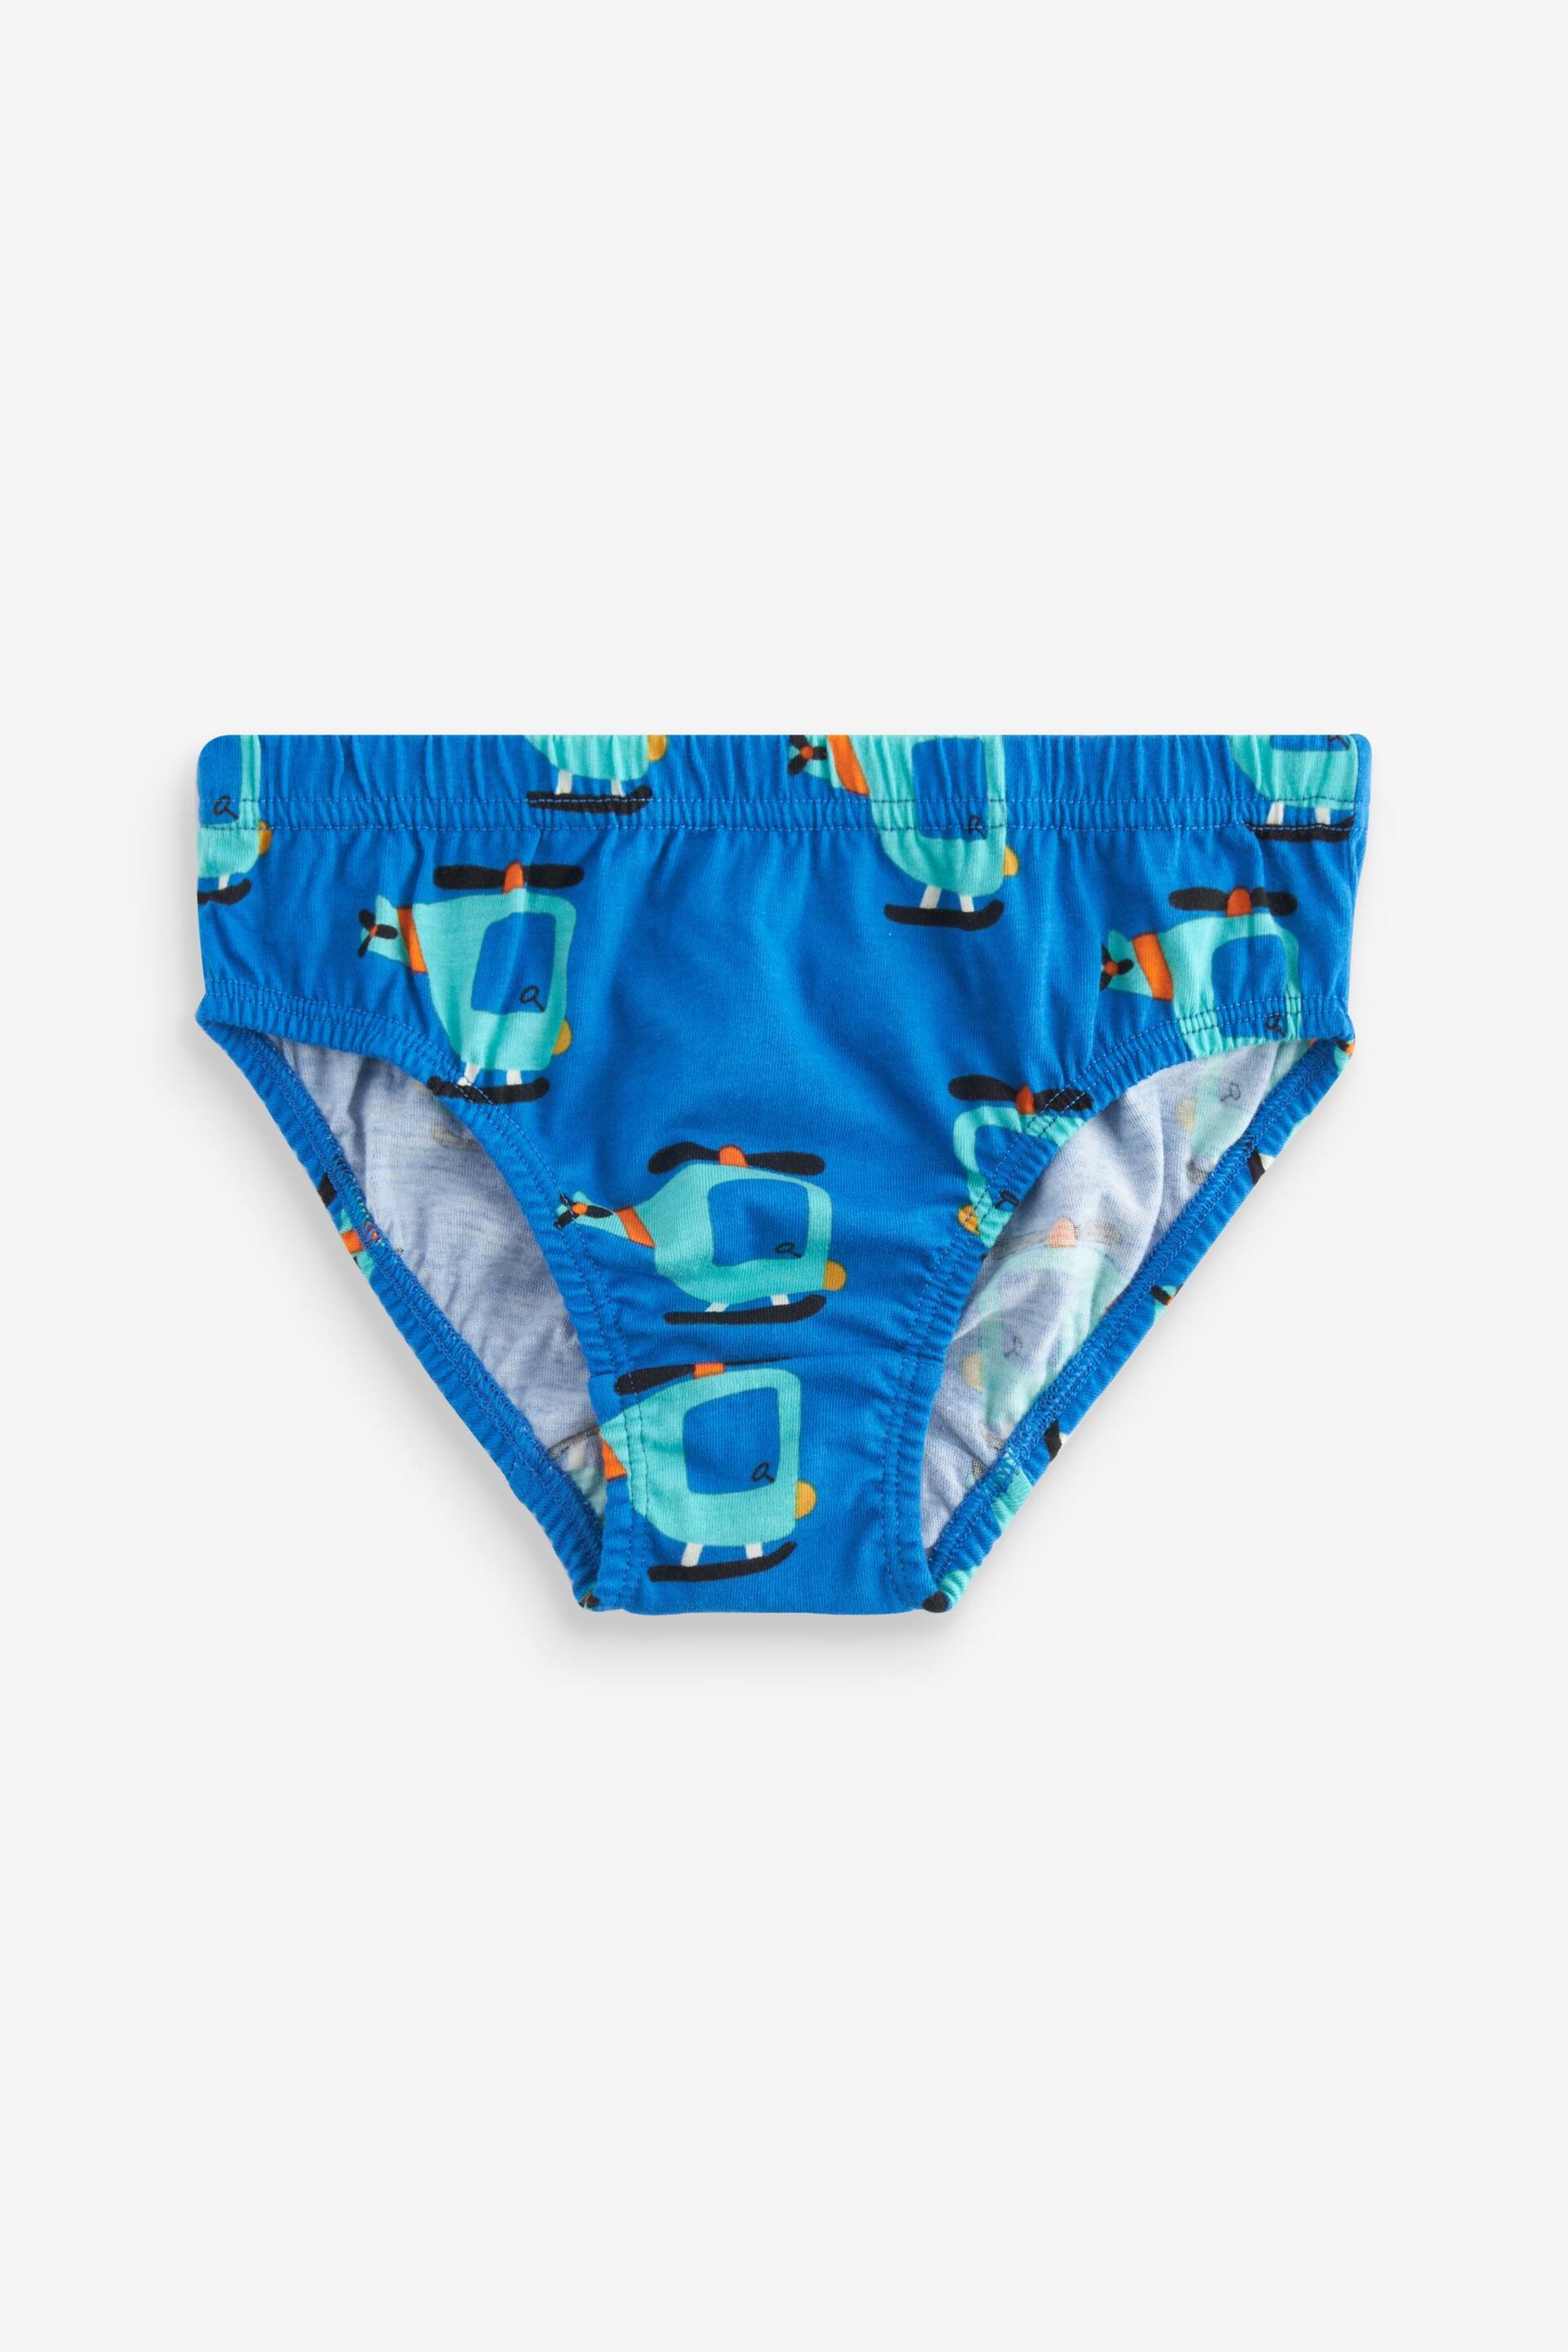 Bright Primary Print Briefs 5 Pack (1.5-10yrs) - Image 6 of 8